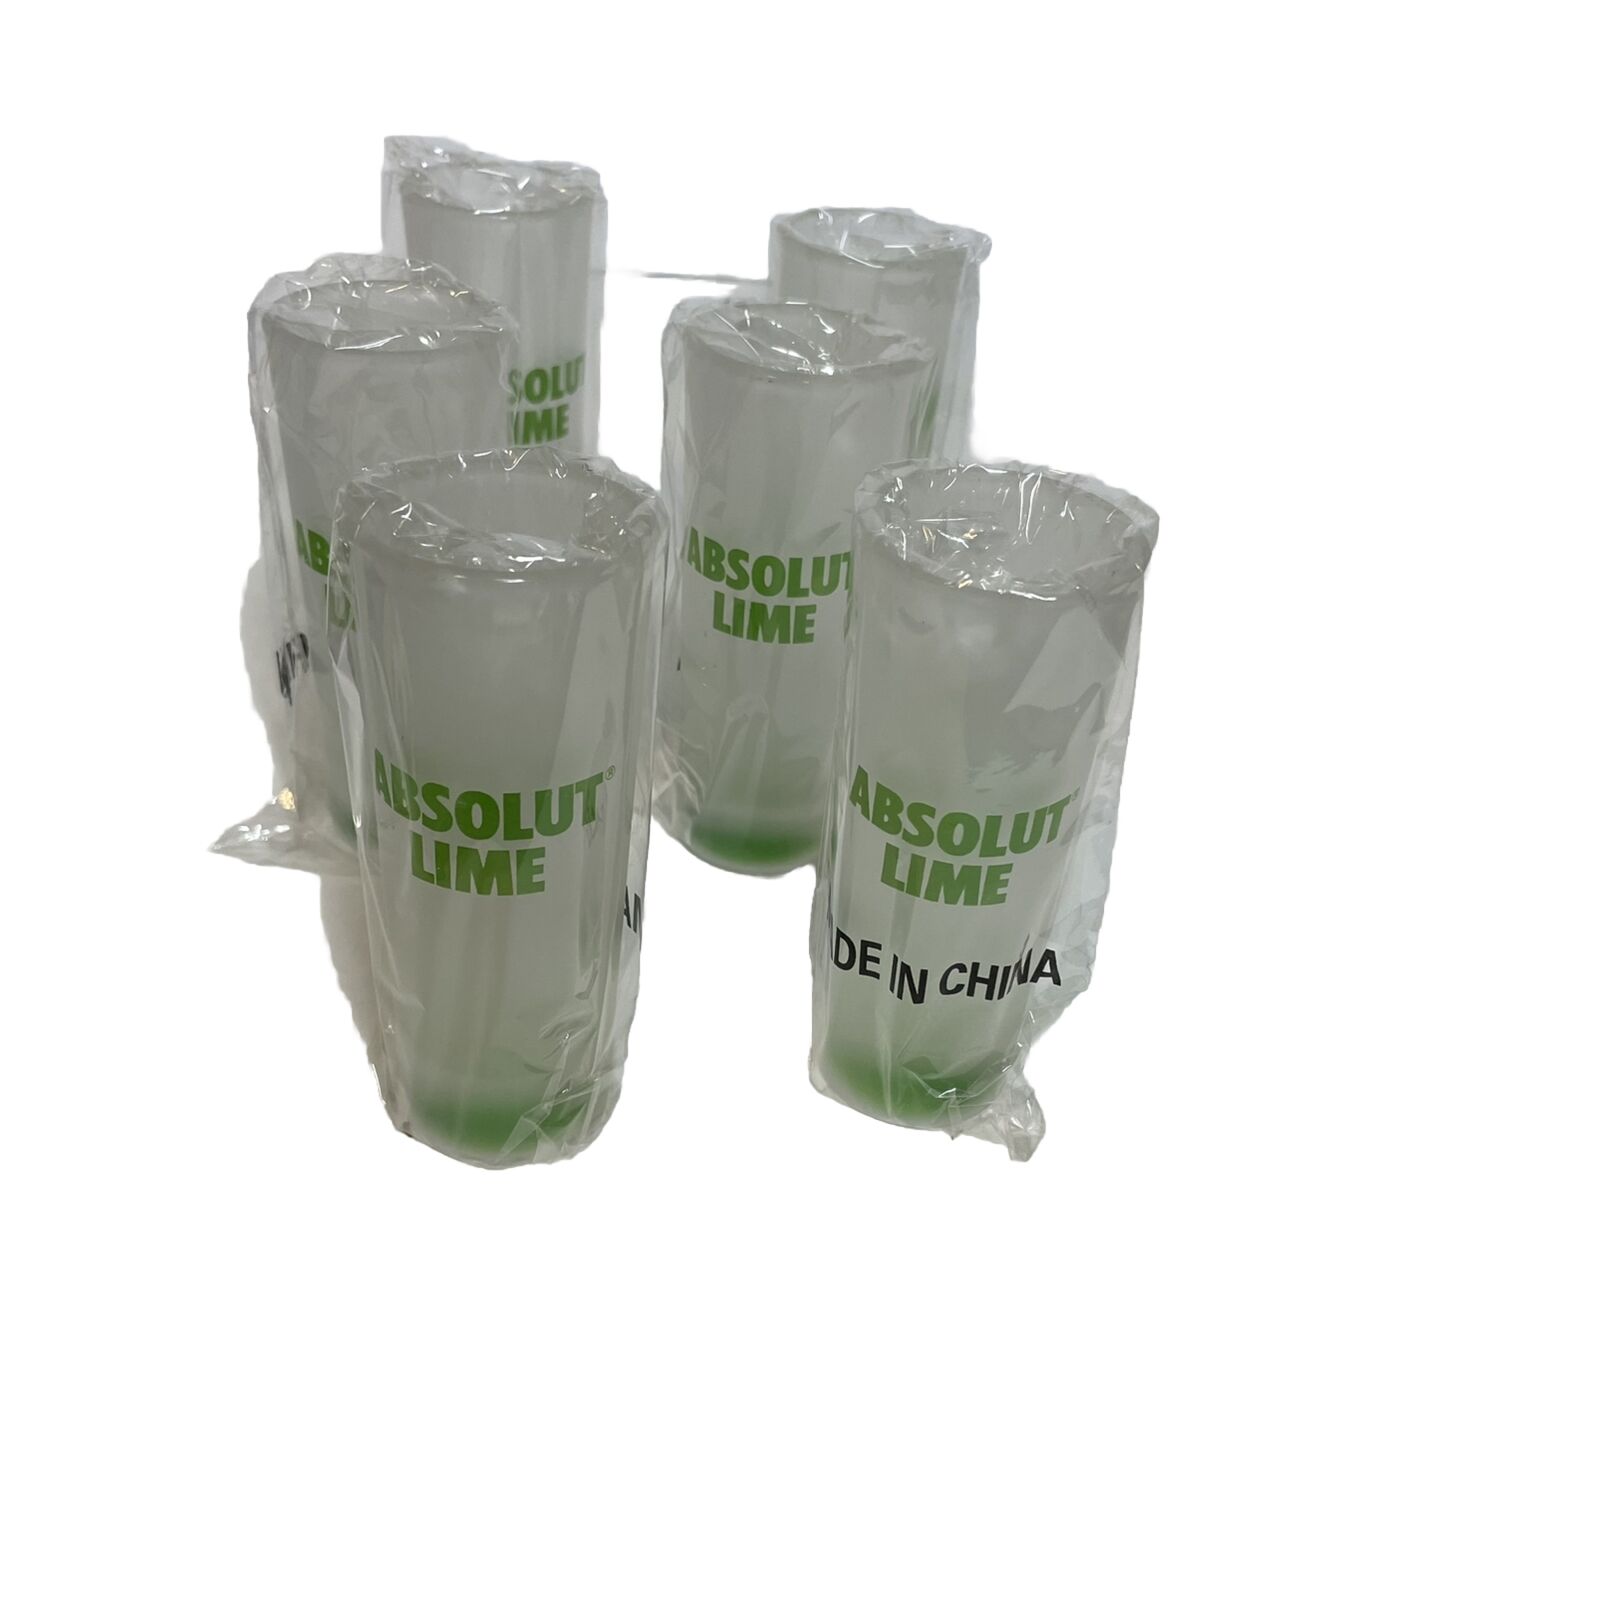 Case of 6 Absolut Vodka Absolut Lime Tall Shot Glasses Frosted